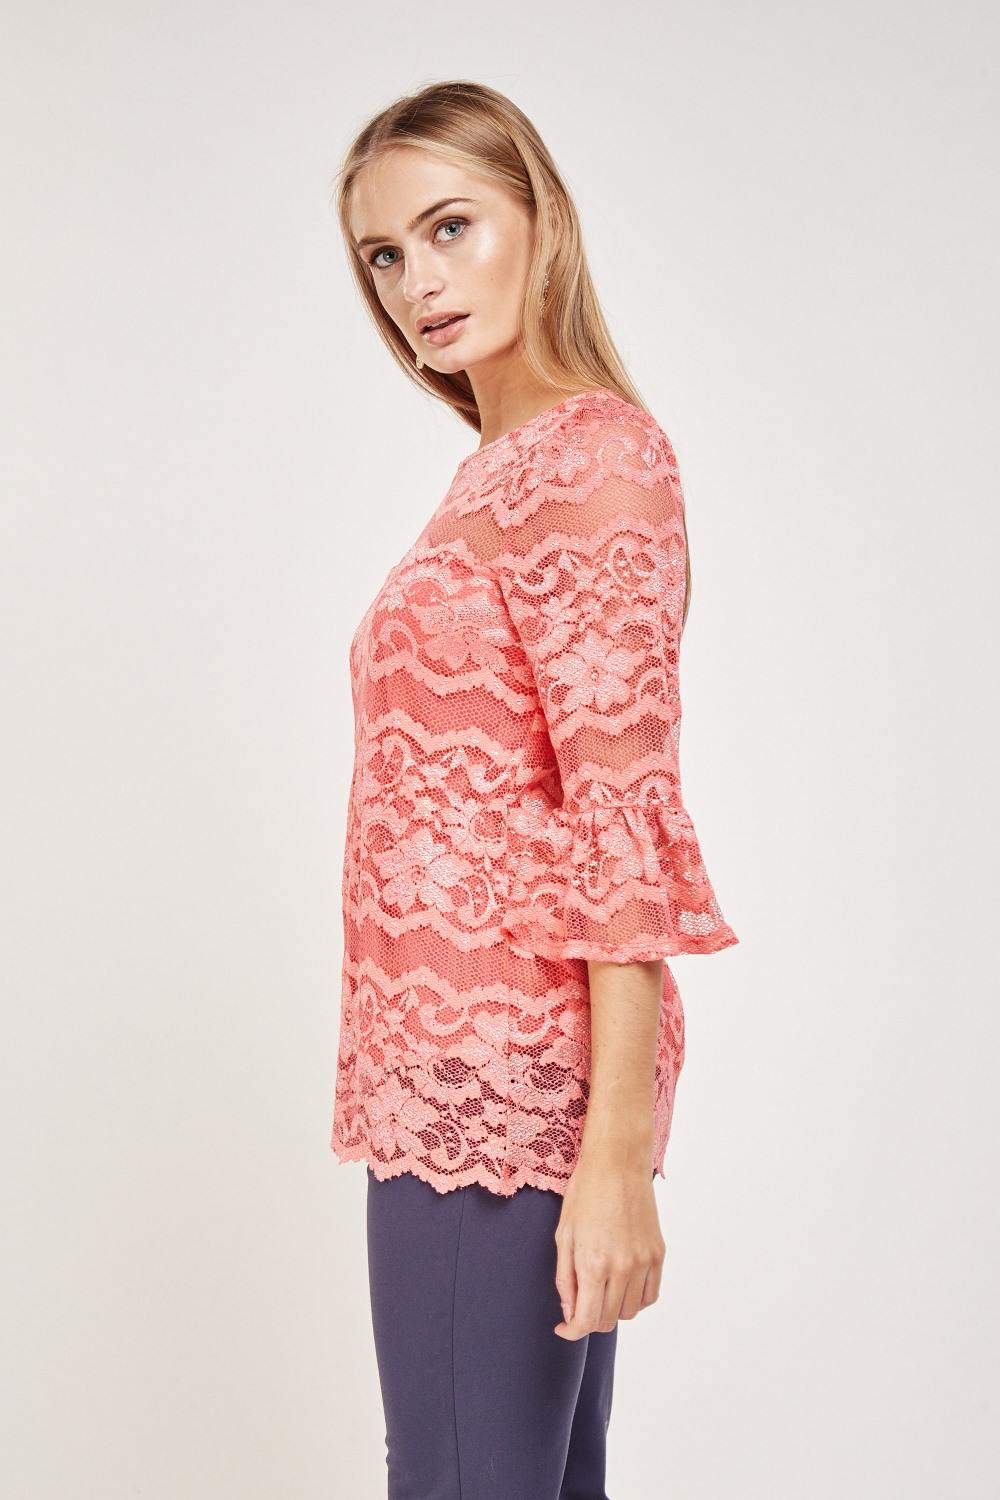 Frilly Sleeve Lace Overlay Top - Just $7